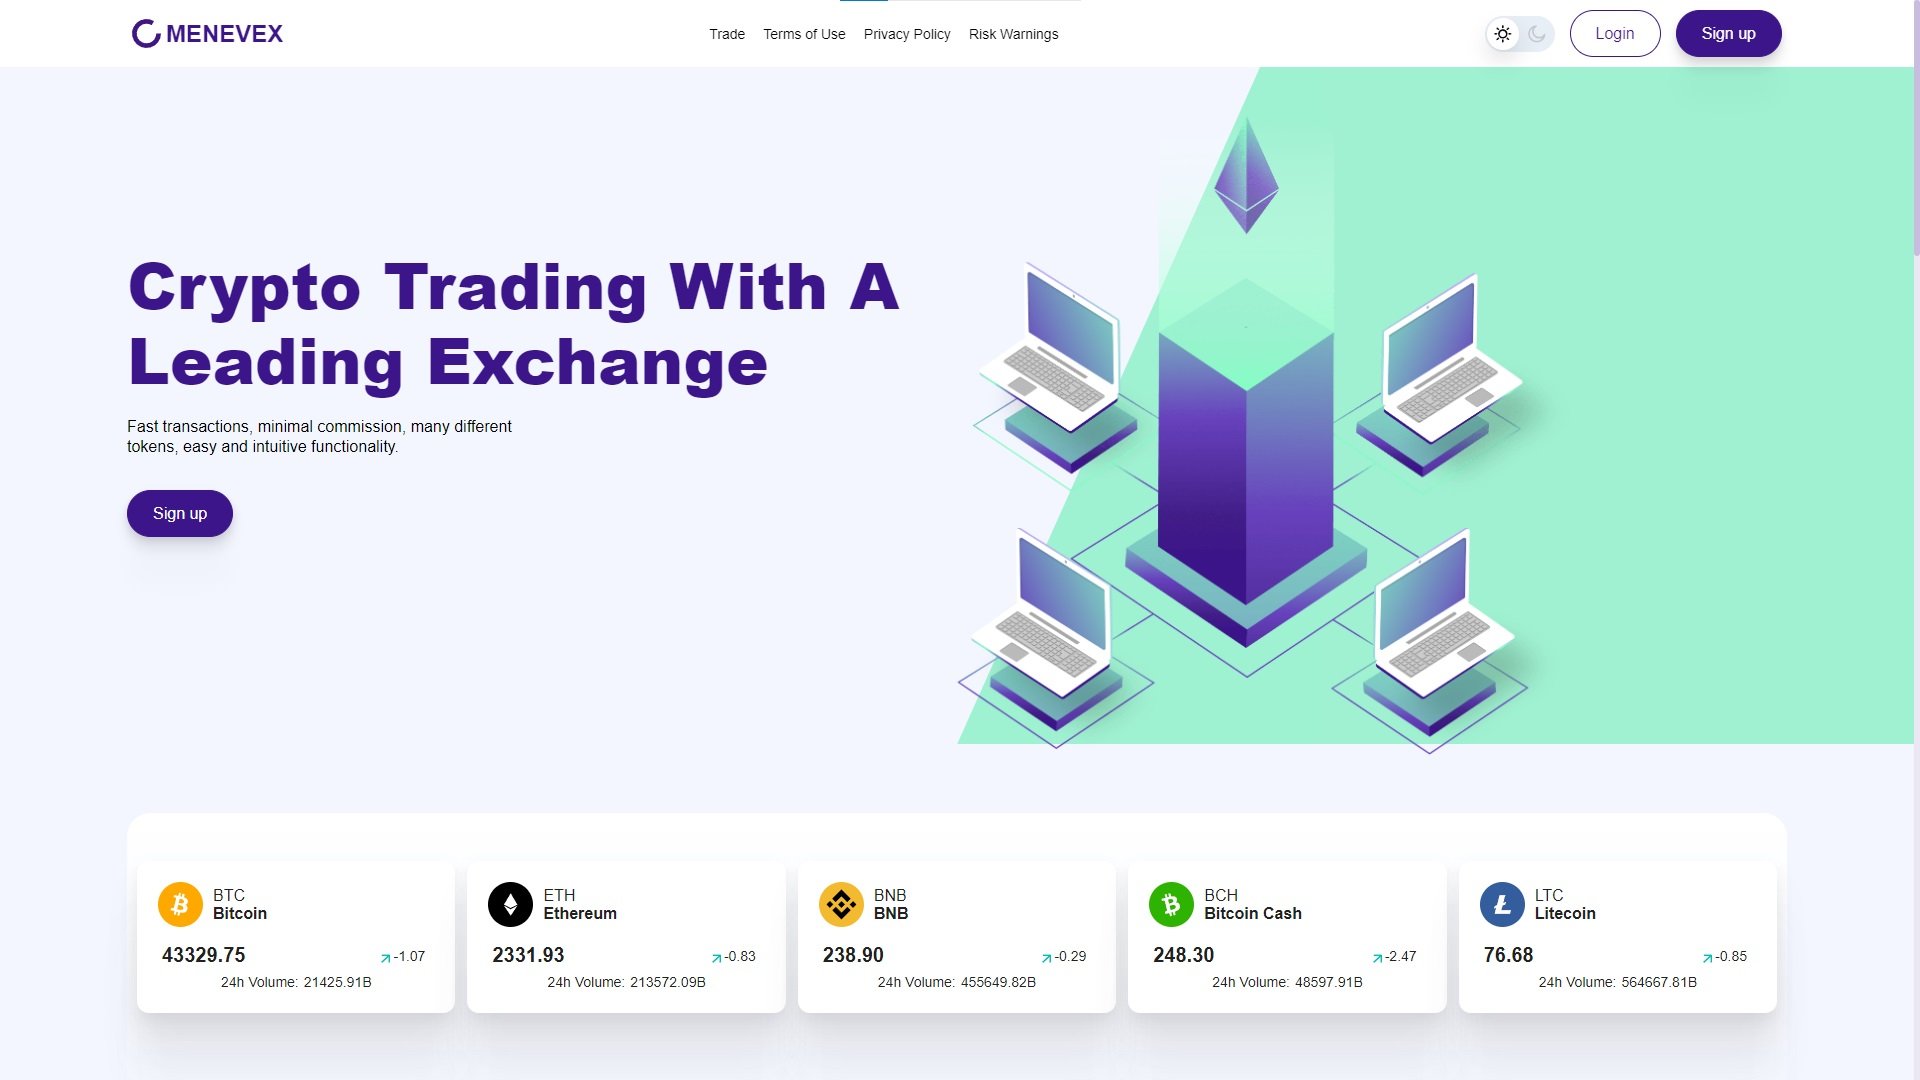 Is Menevex a Scam or Legit Cryptocurrency Trading Platform at menevex.com?